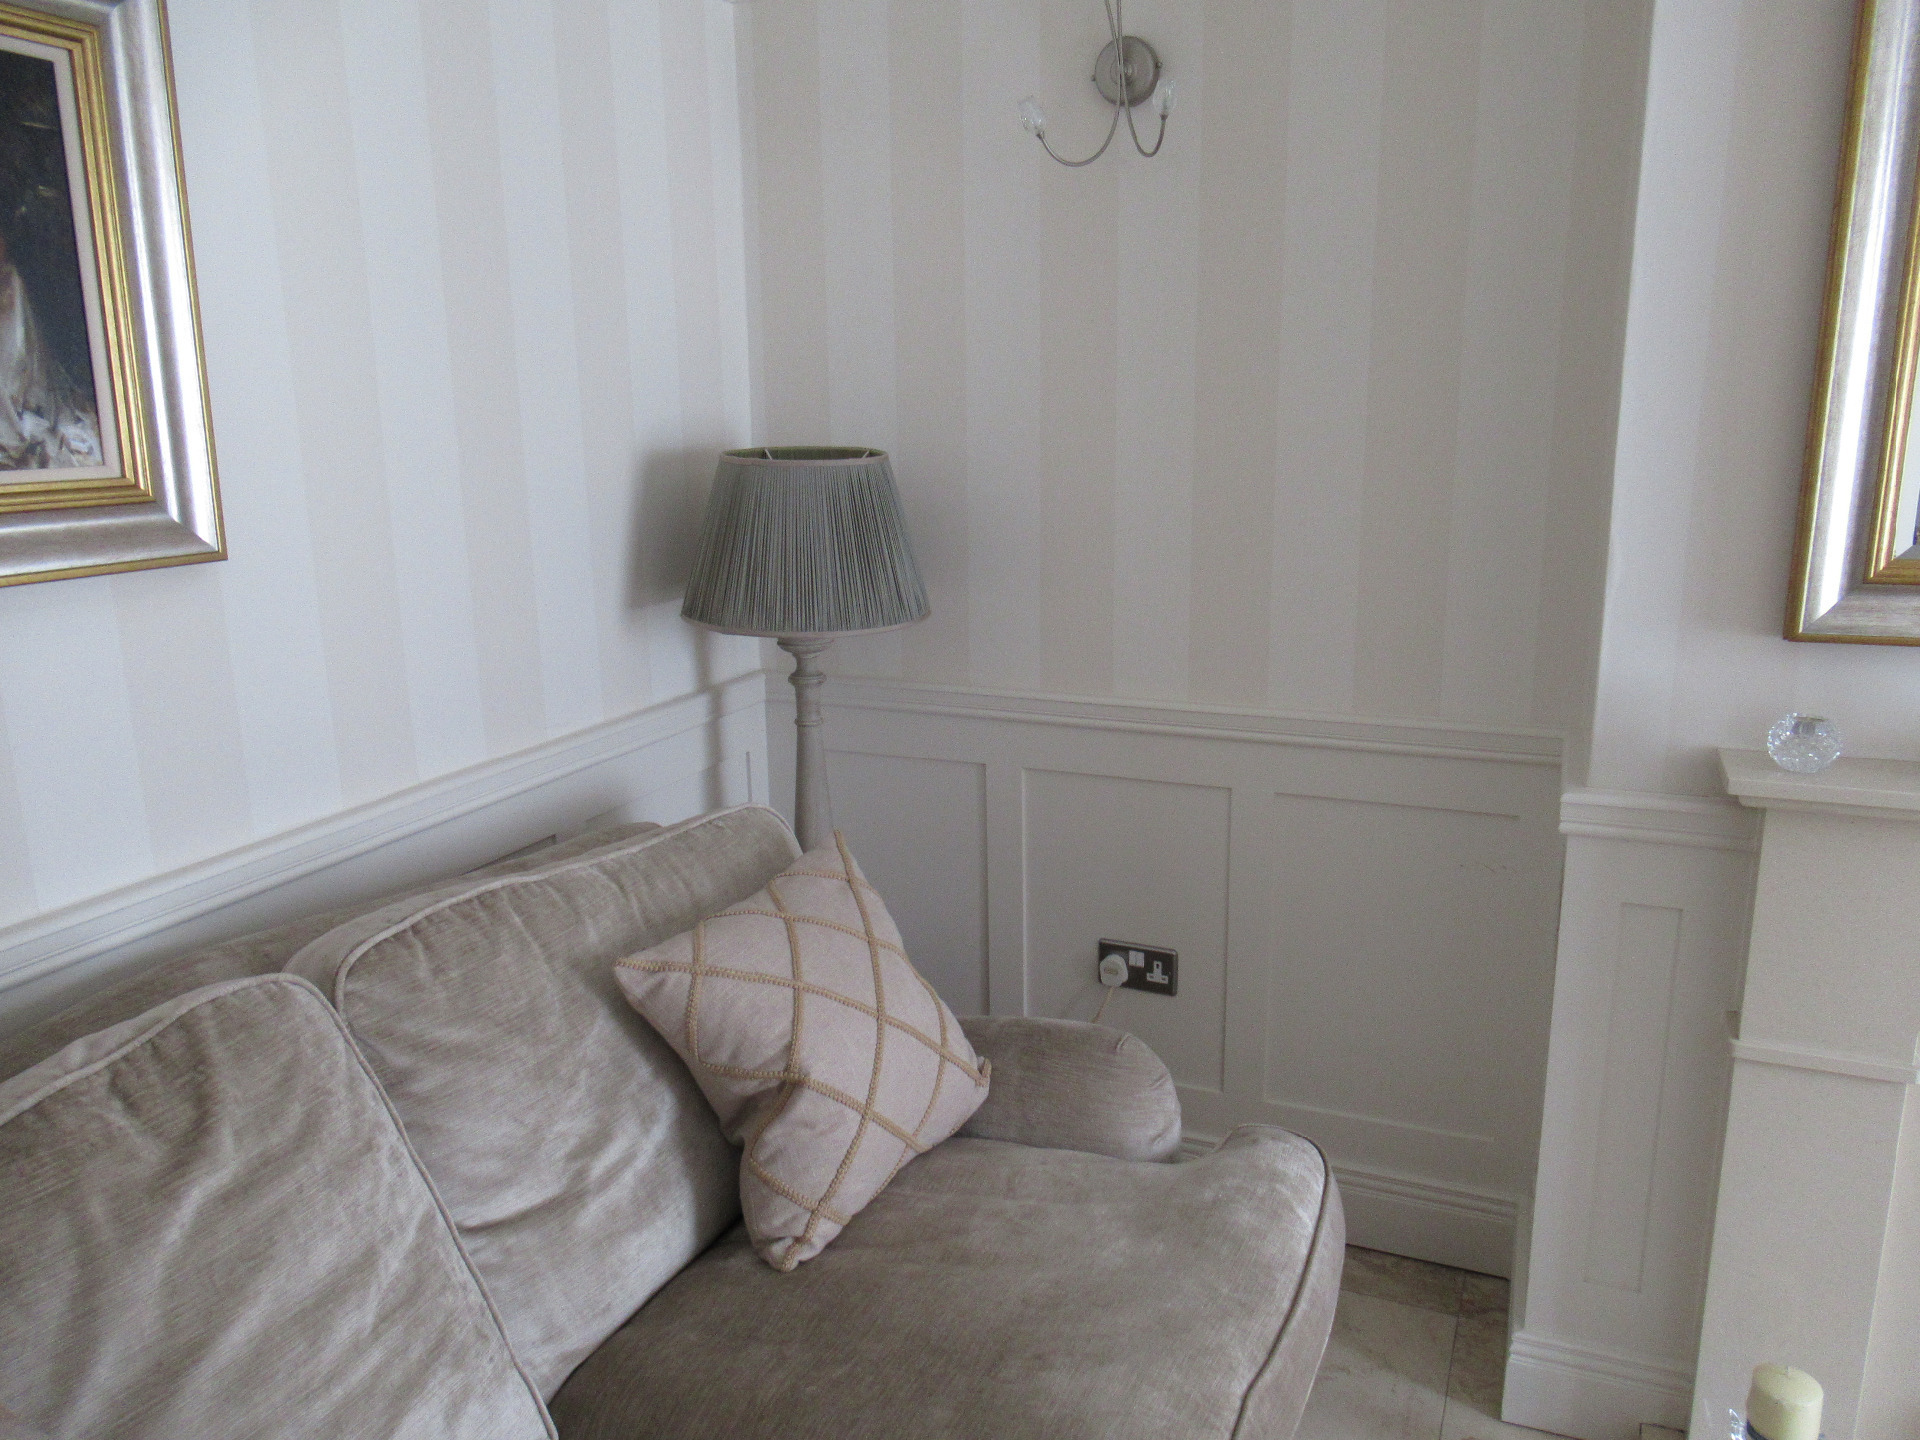 Half wall panelling in sitting room renovation installed by Elite Building Services Swords